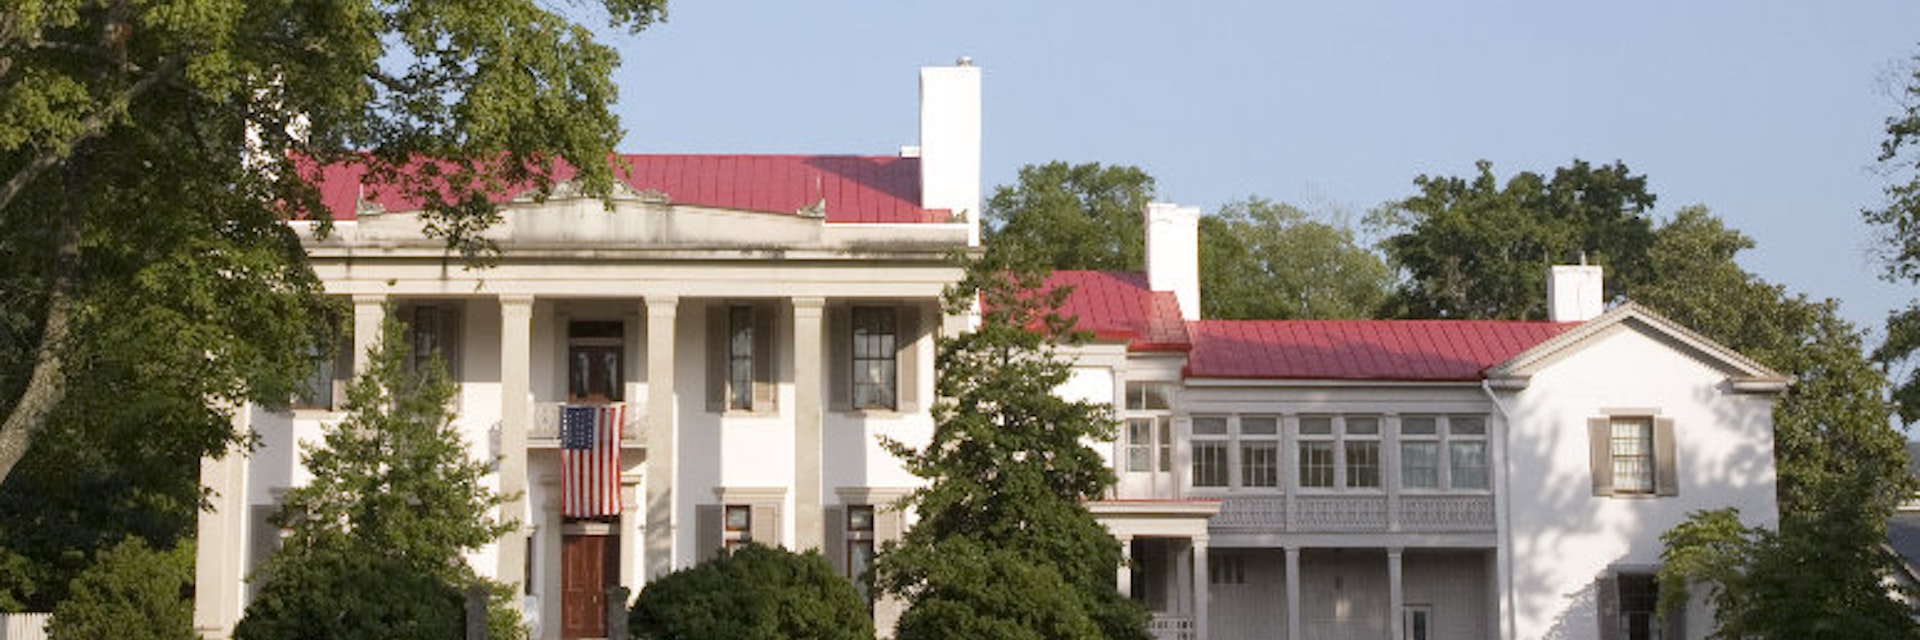 45 Unique things to do in Nashville Experiences You Won't Find Anywhere Else - Walk Through Time at the Belle Meade Plantation